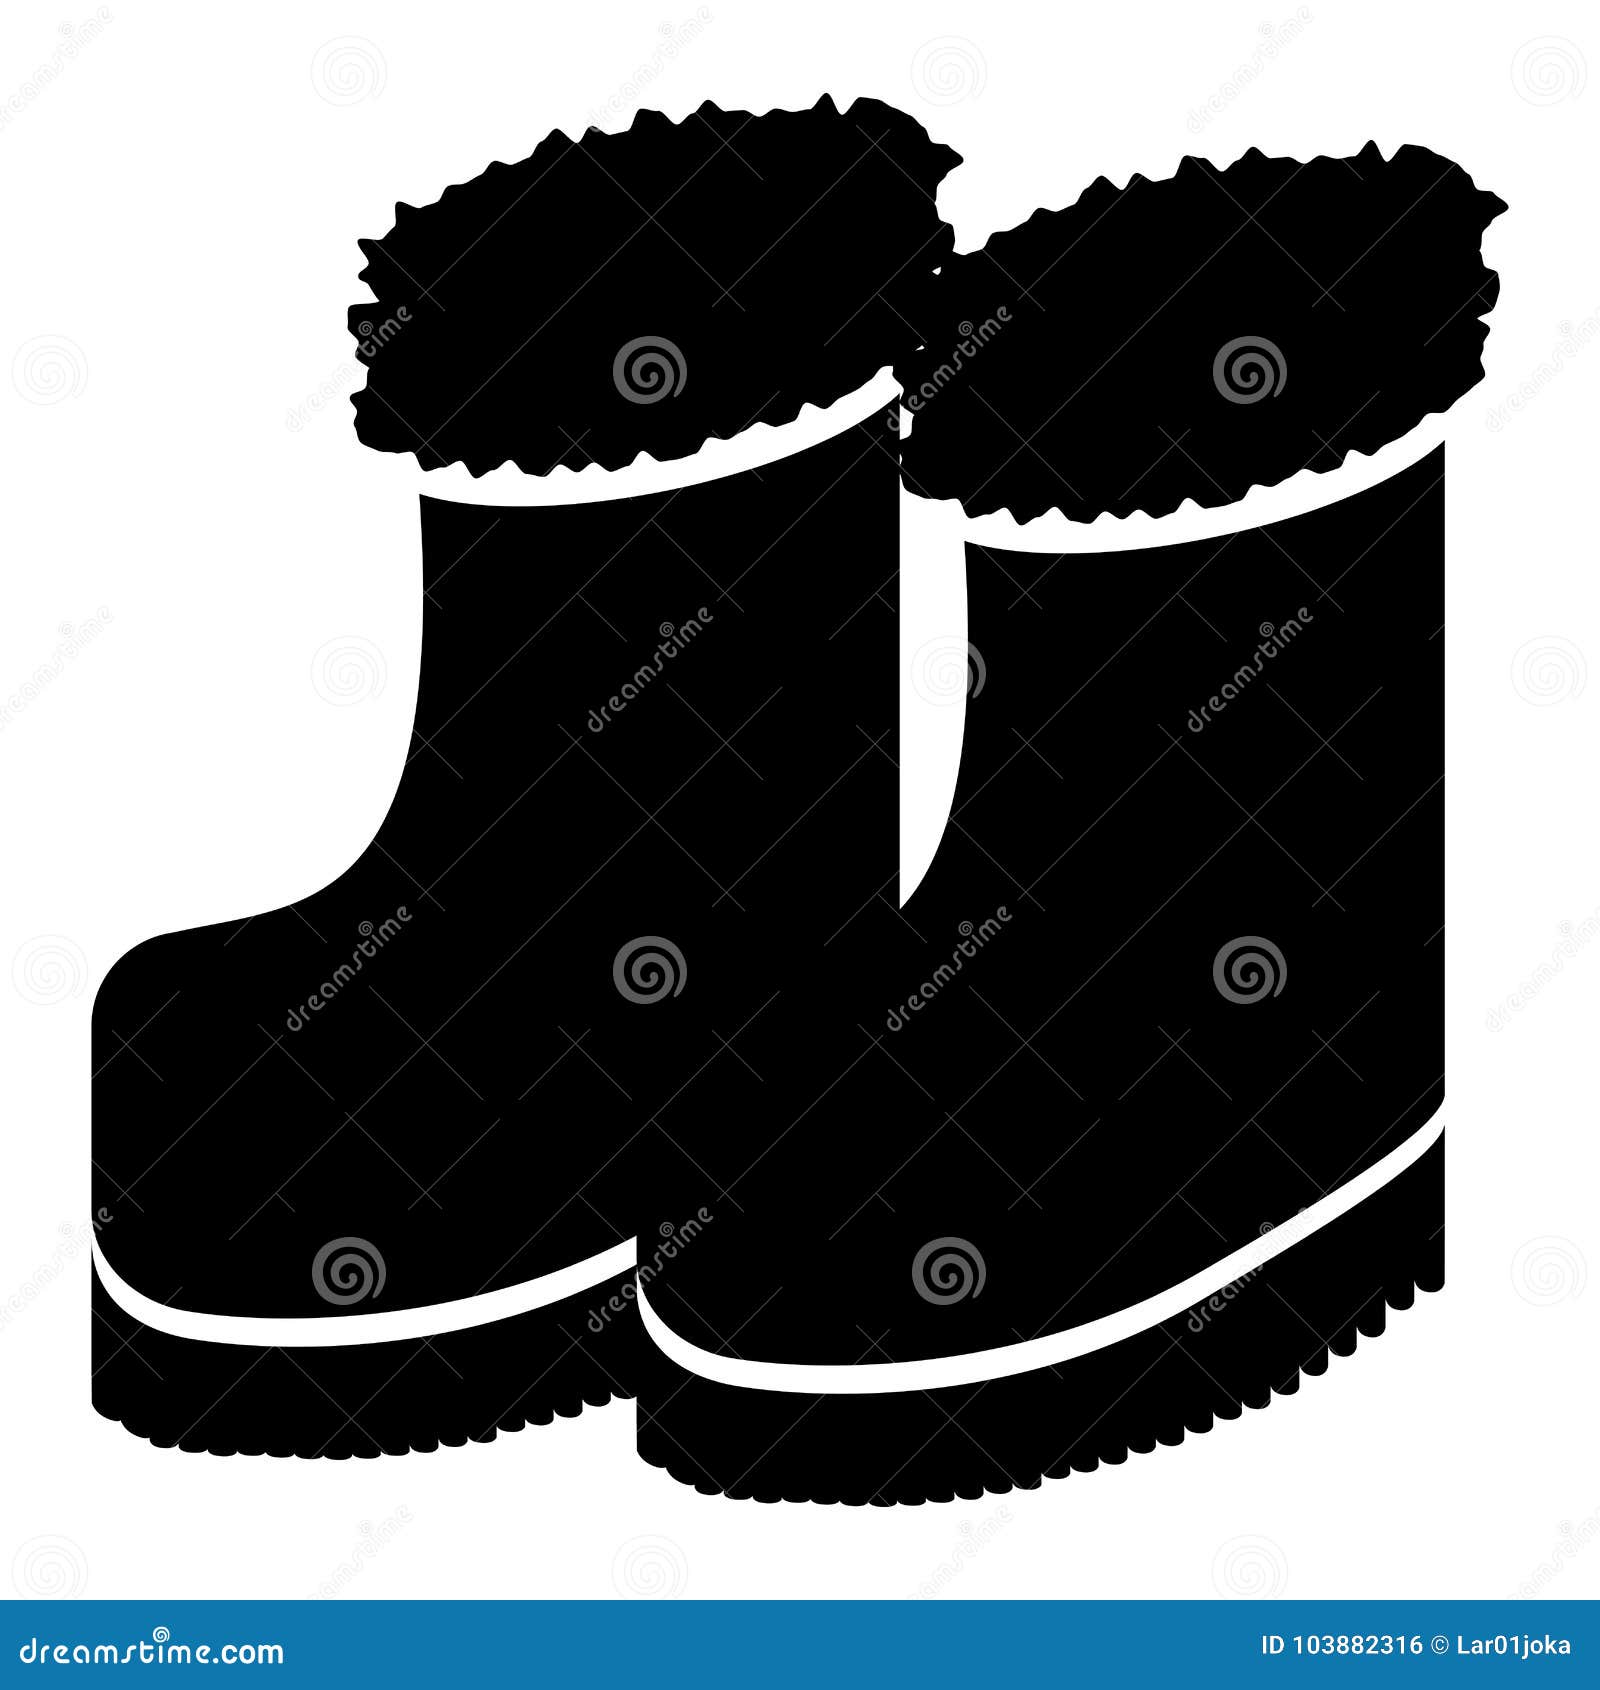 Winter boots silhouette stock vector. Illustration of brown - 103882316